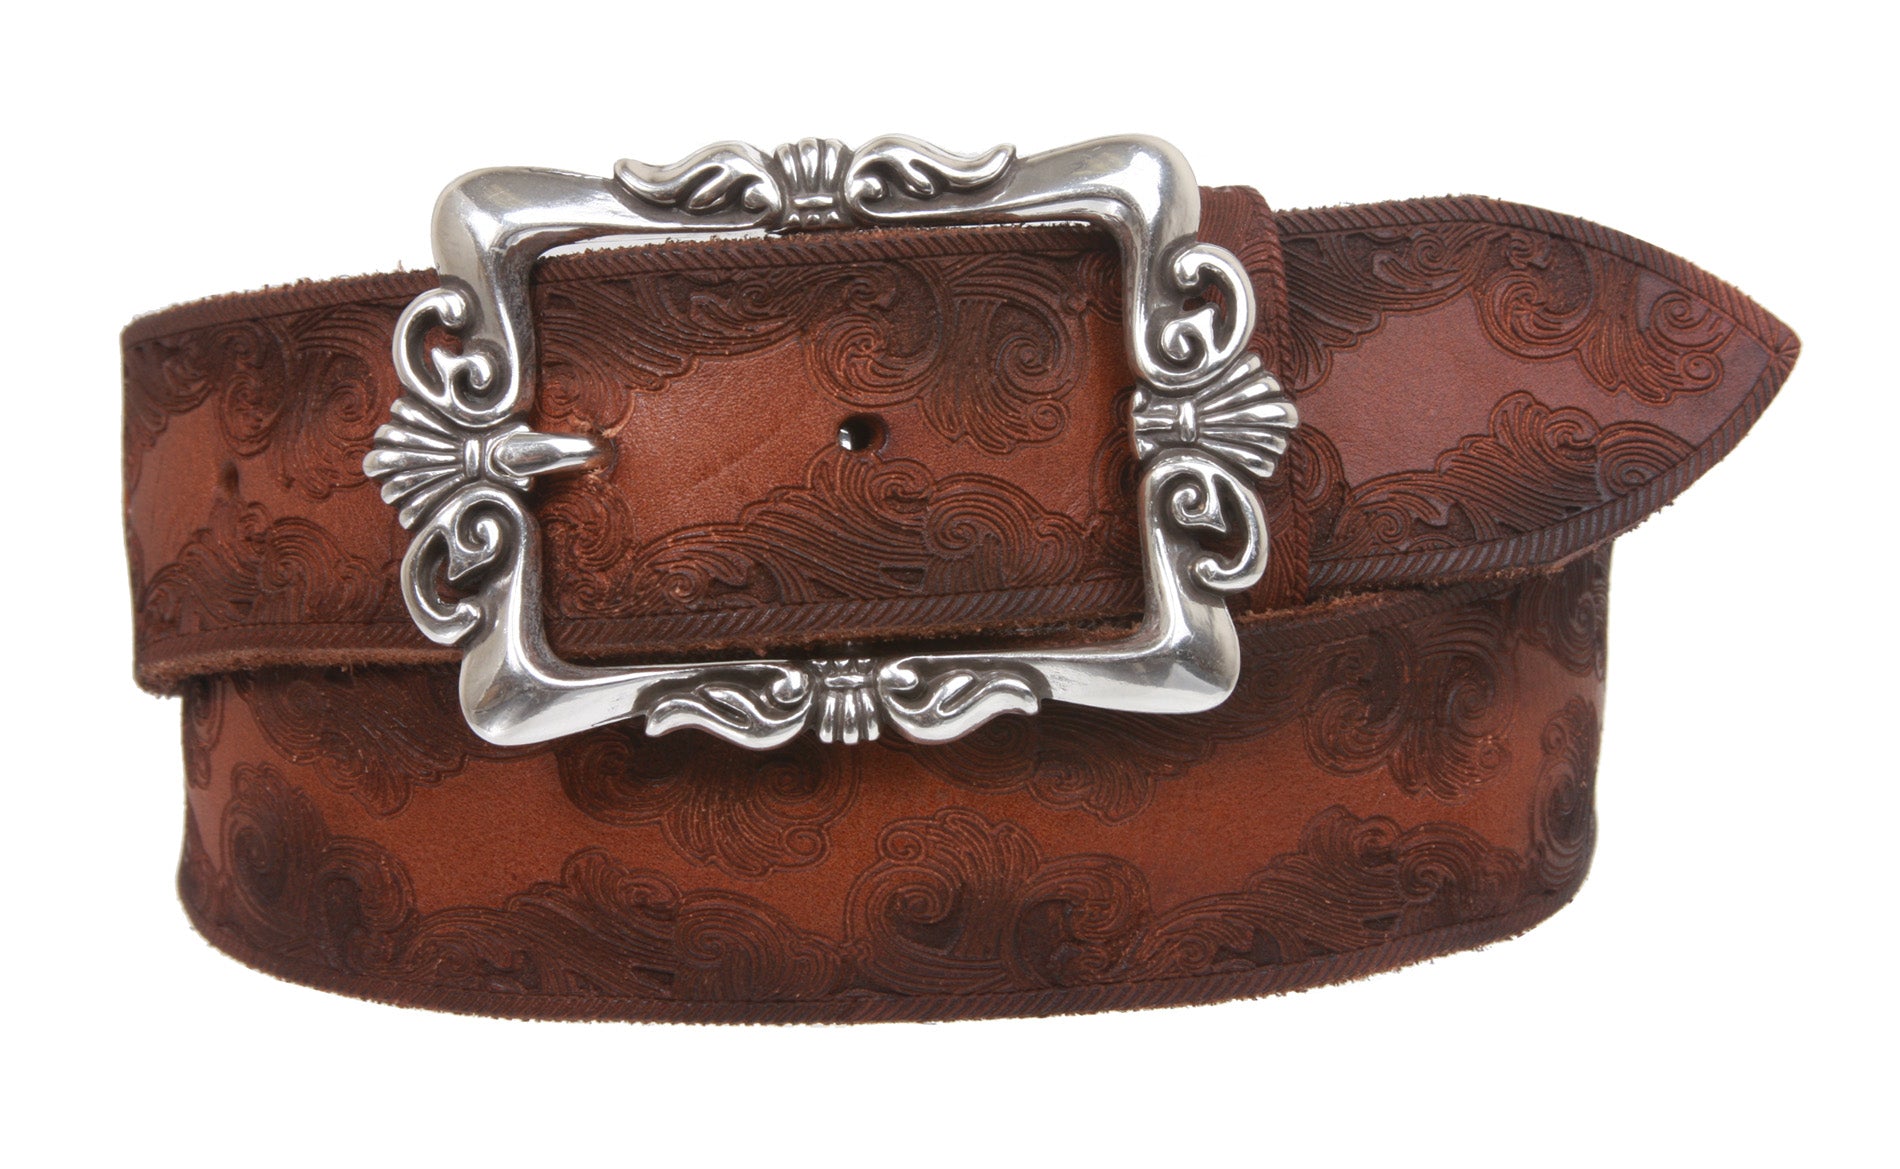 Snap On Soft Hand Floral Embossed Vintage Cowhide Full Grain Leather Casual Belt